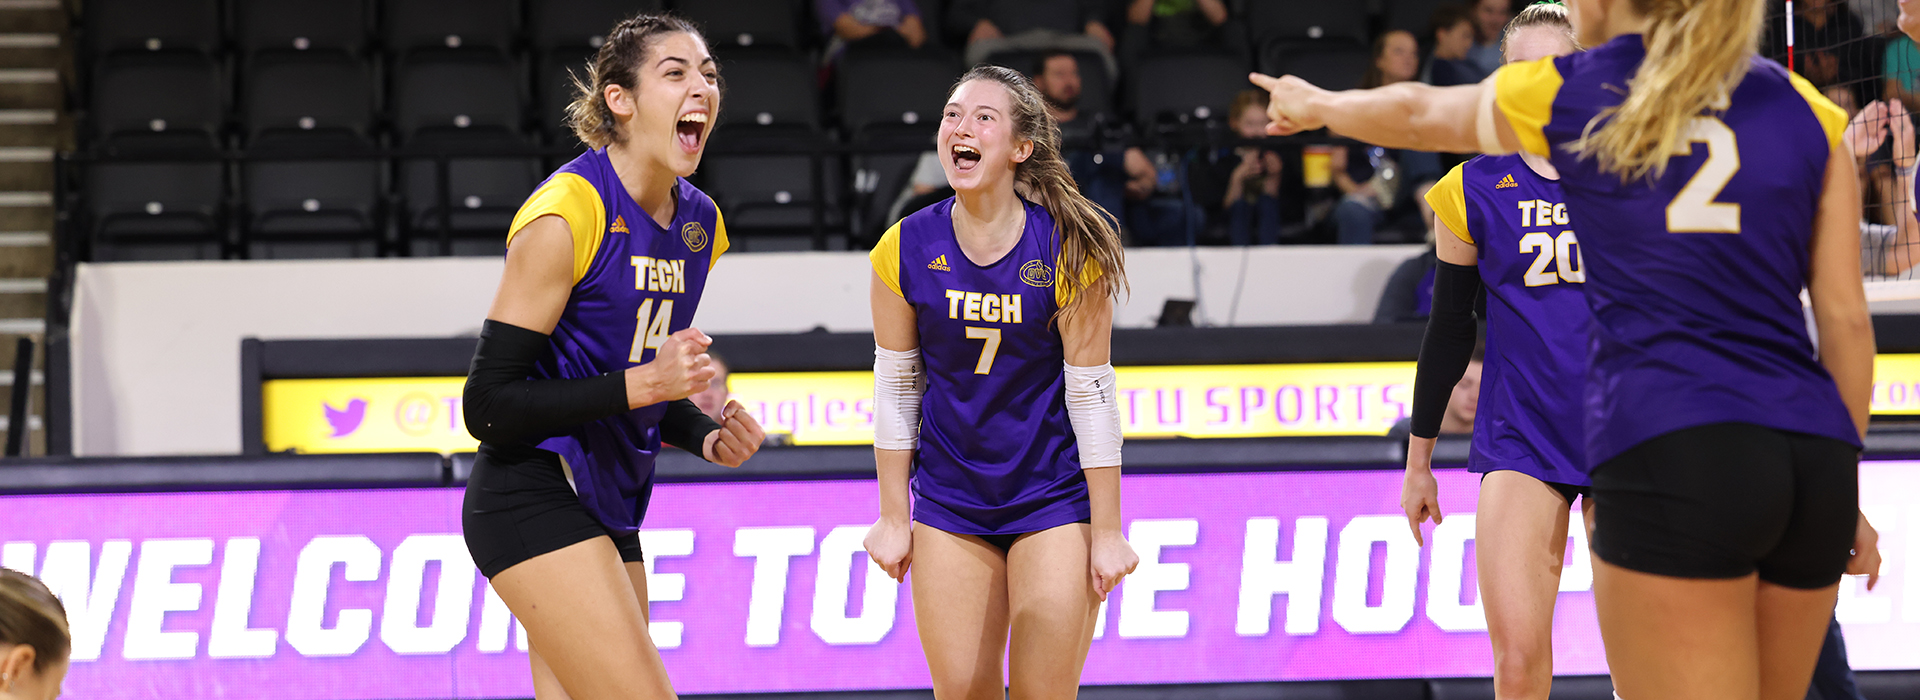 Purple and gold open three-match road swing with Tuesday tilt at Morehead State